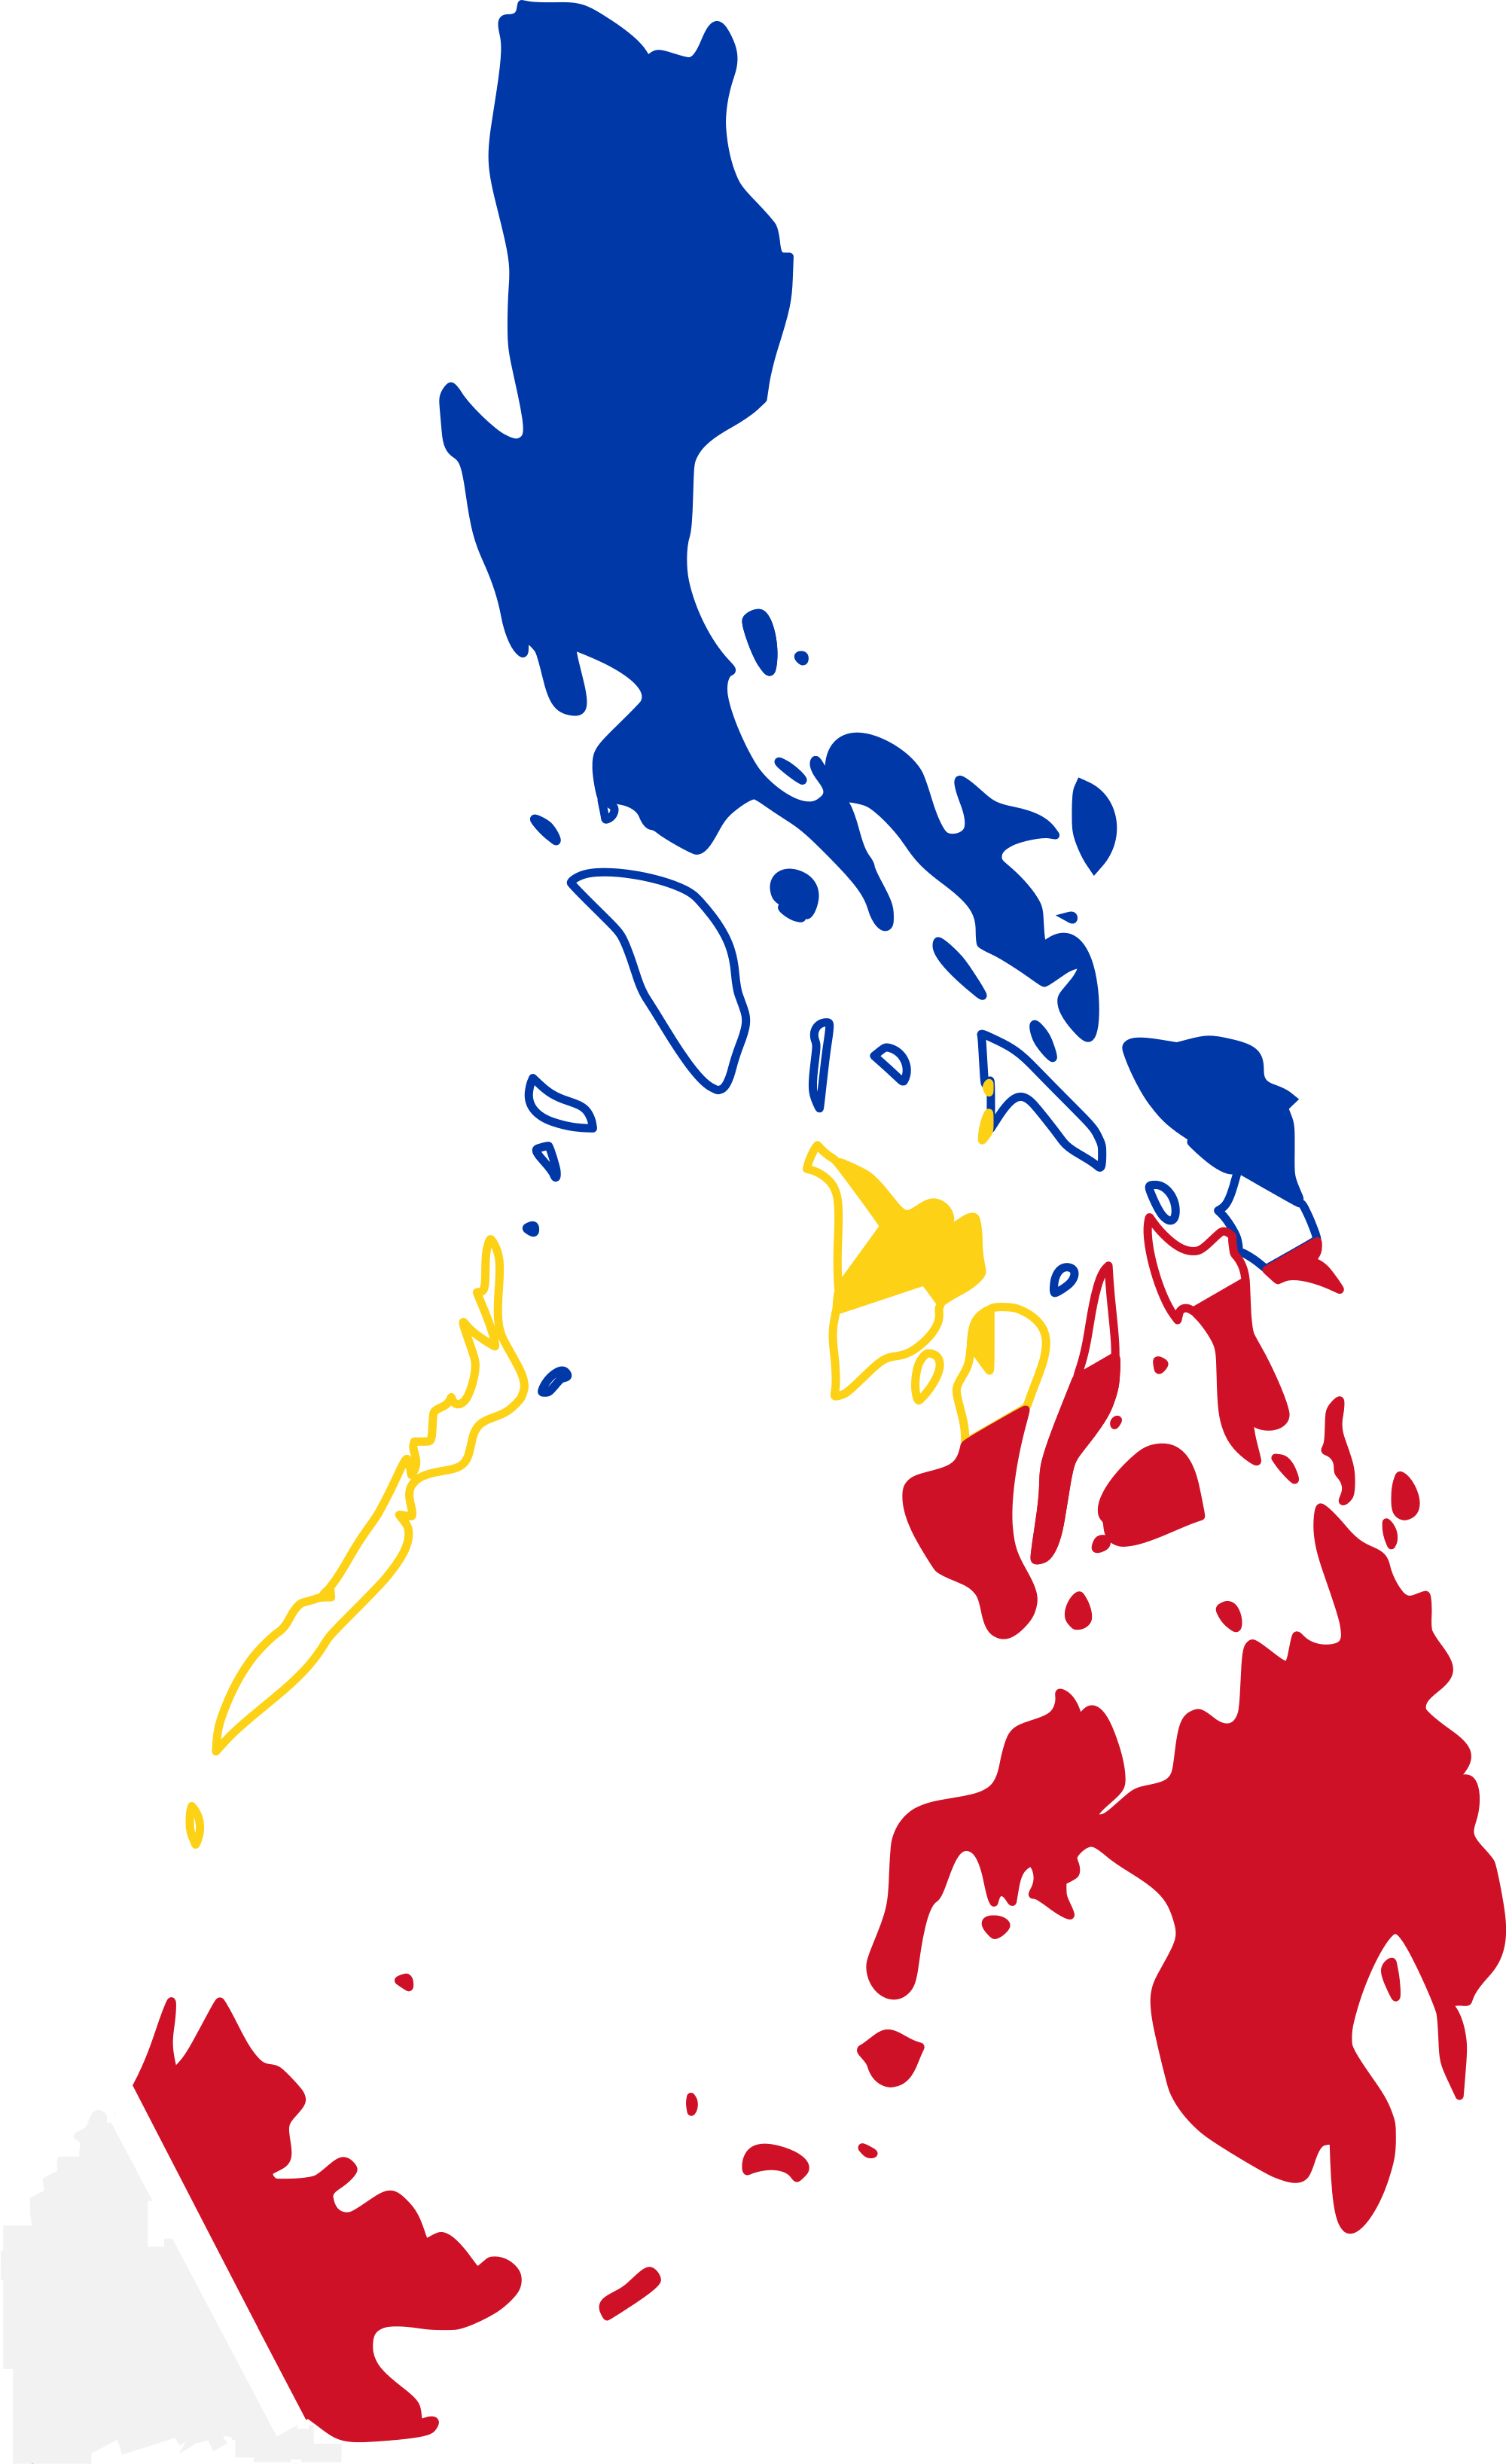 philippines flag free clipart - Clipground